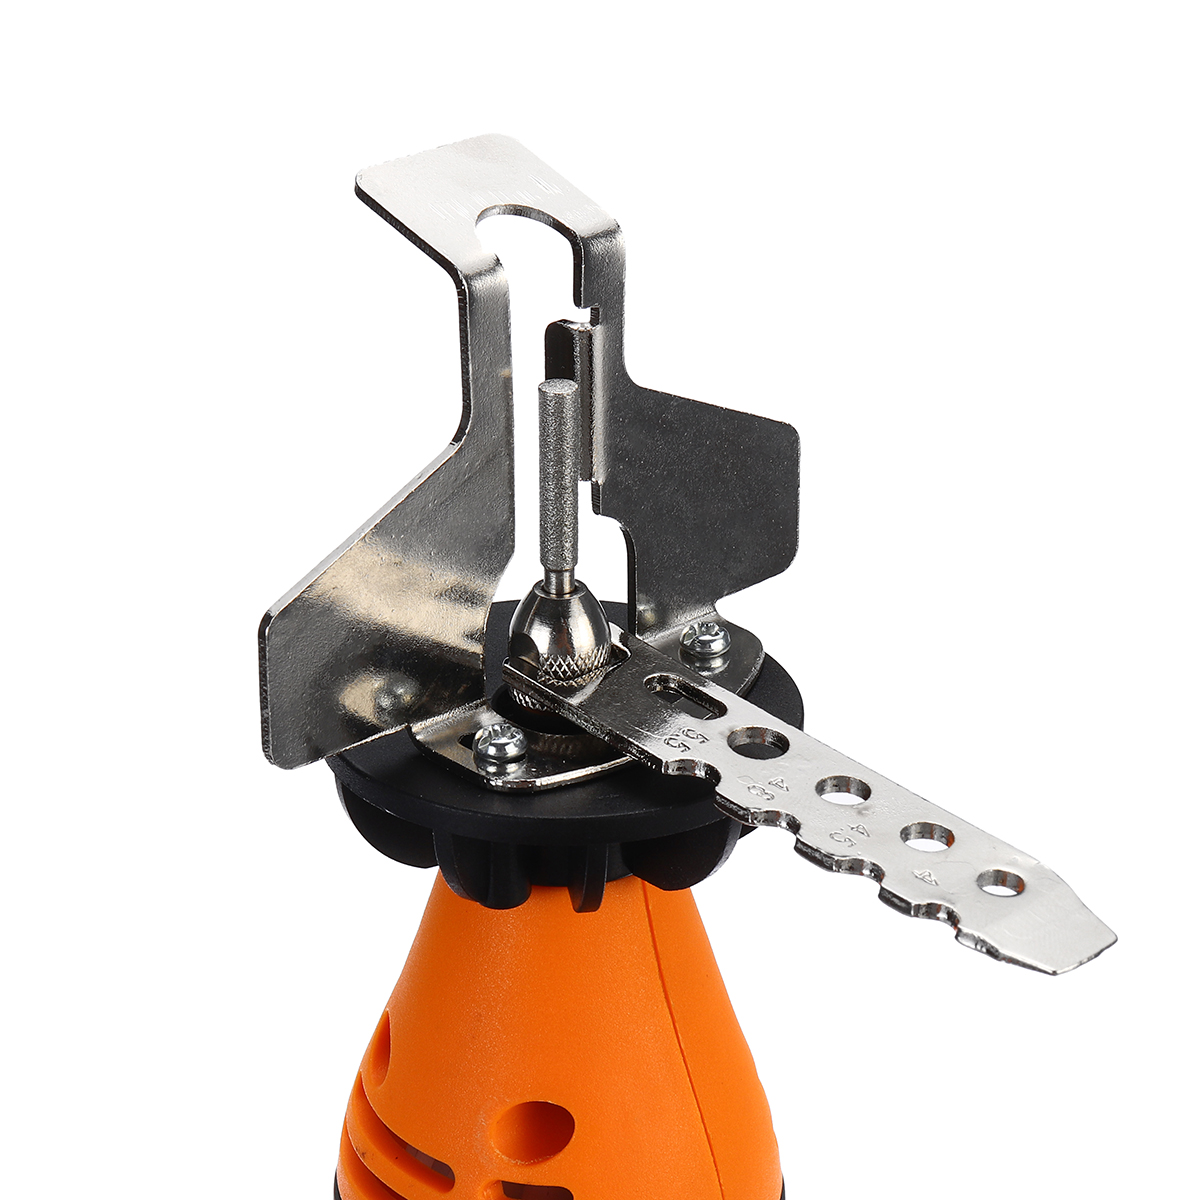 Chain-Saw-Sharpening-Attachment-Sharpener-Guide-Drill-Adapter-for-Electric-Grinder-1646064-7